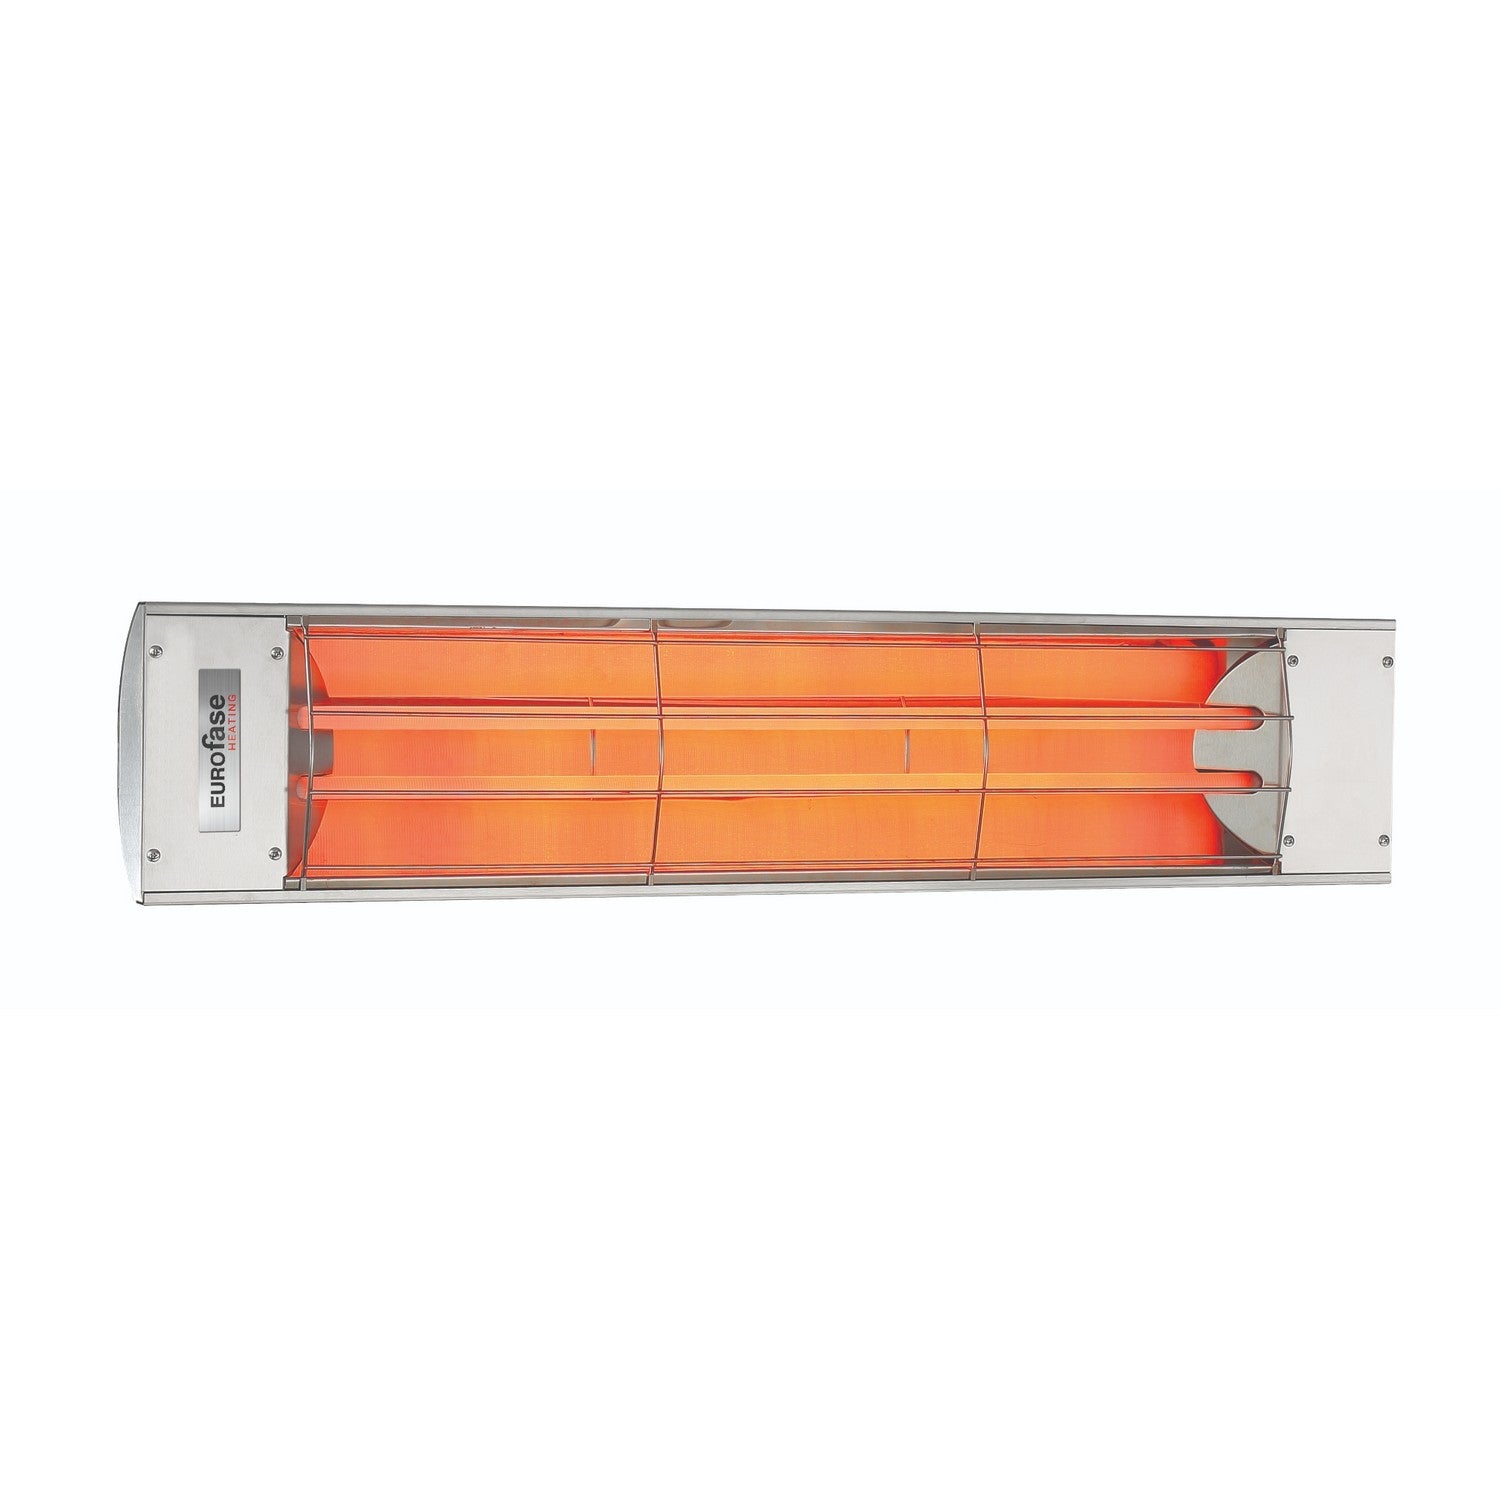 Eurofase - EF50208S - Electric Heater - Stainless Steel